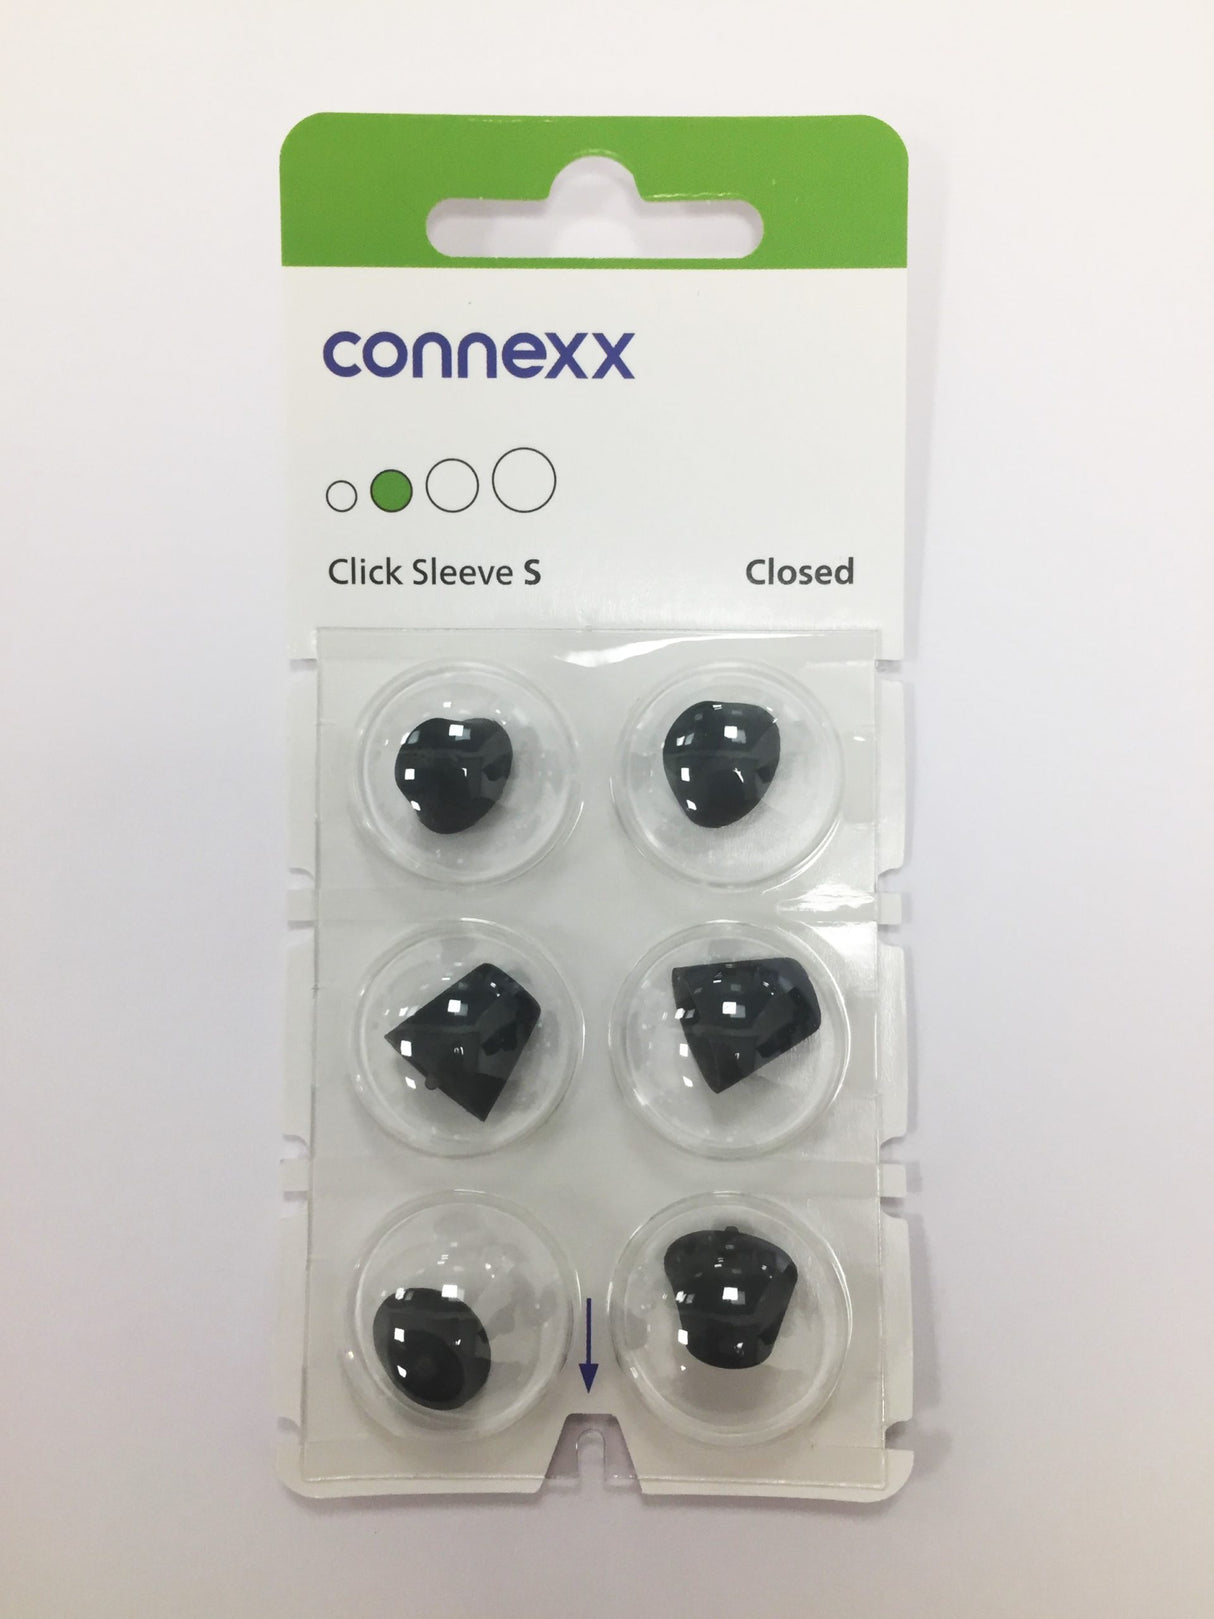 Connexx Click Sleeve S Closed